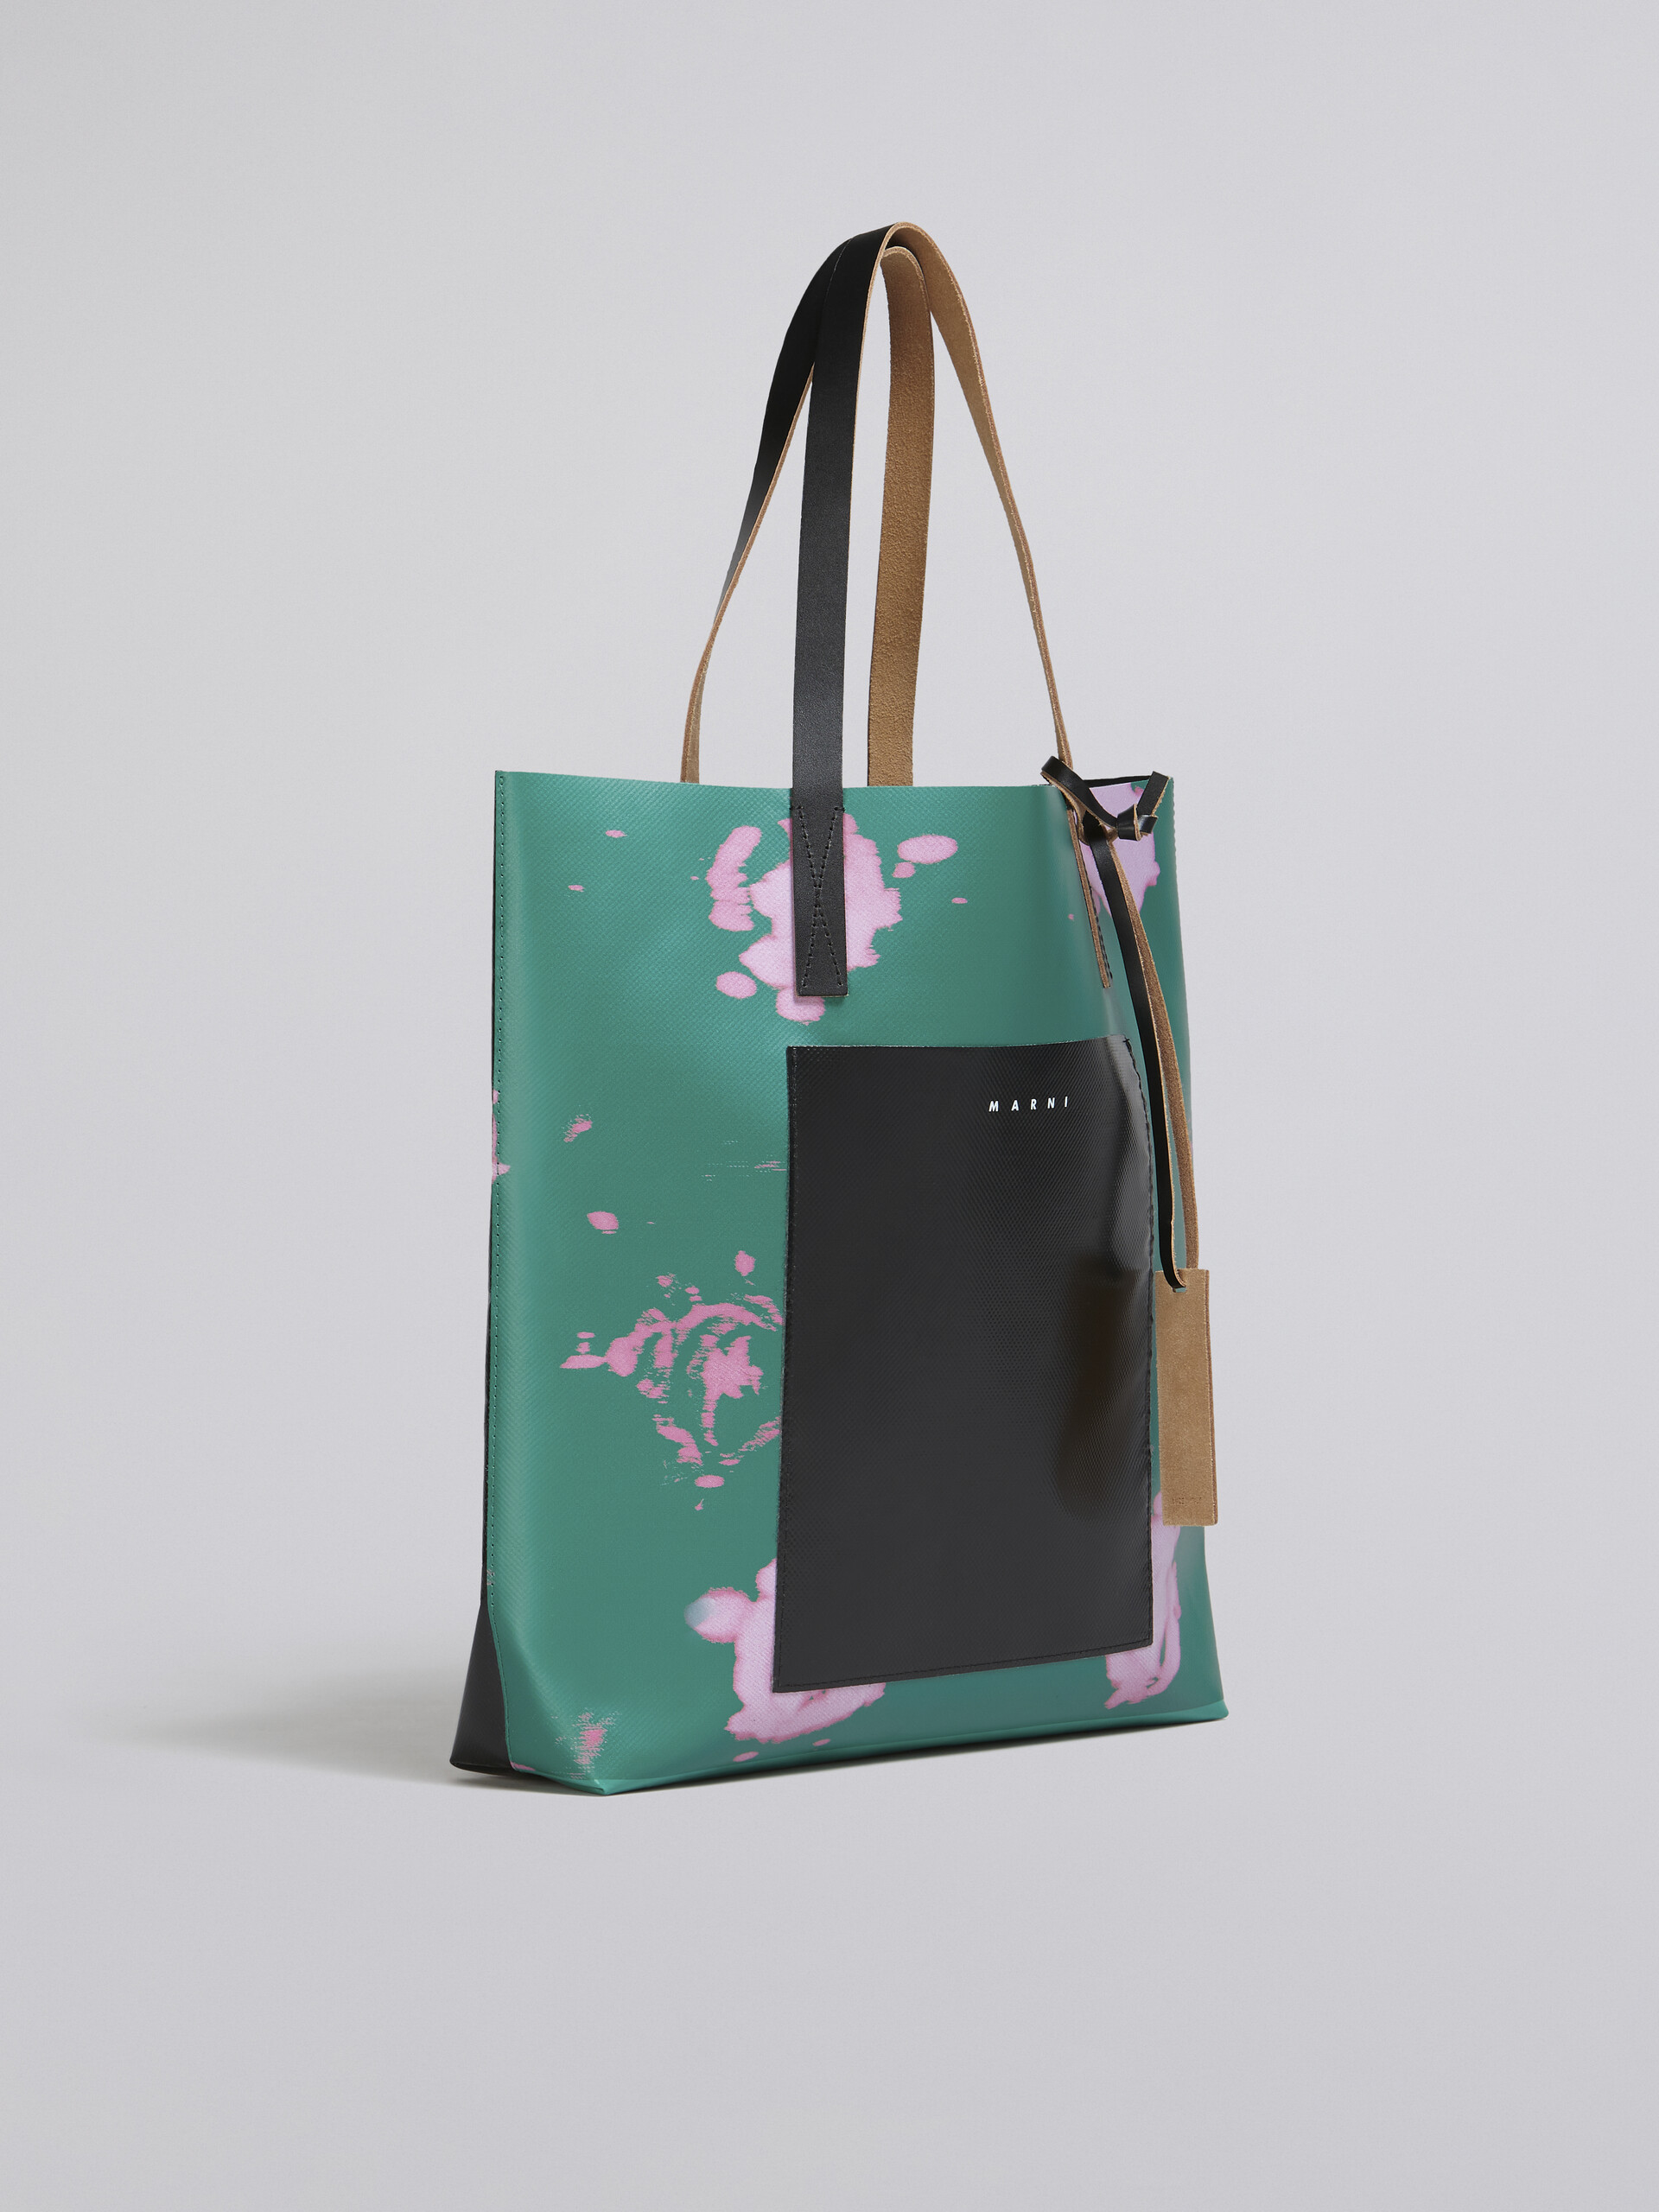 Borsa in PVC stampa Faded Roses verde - Borse shopping - Image 6